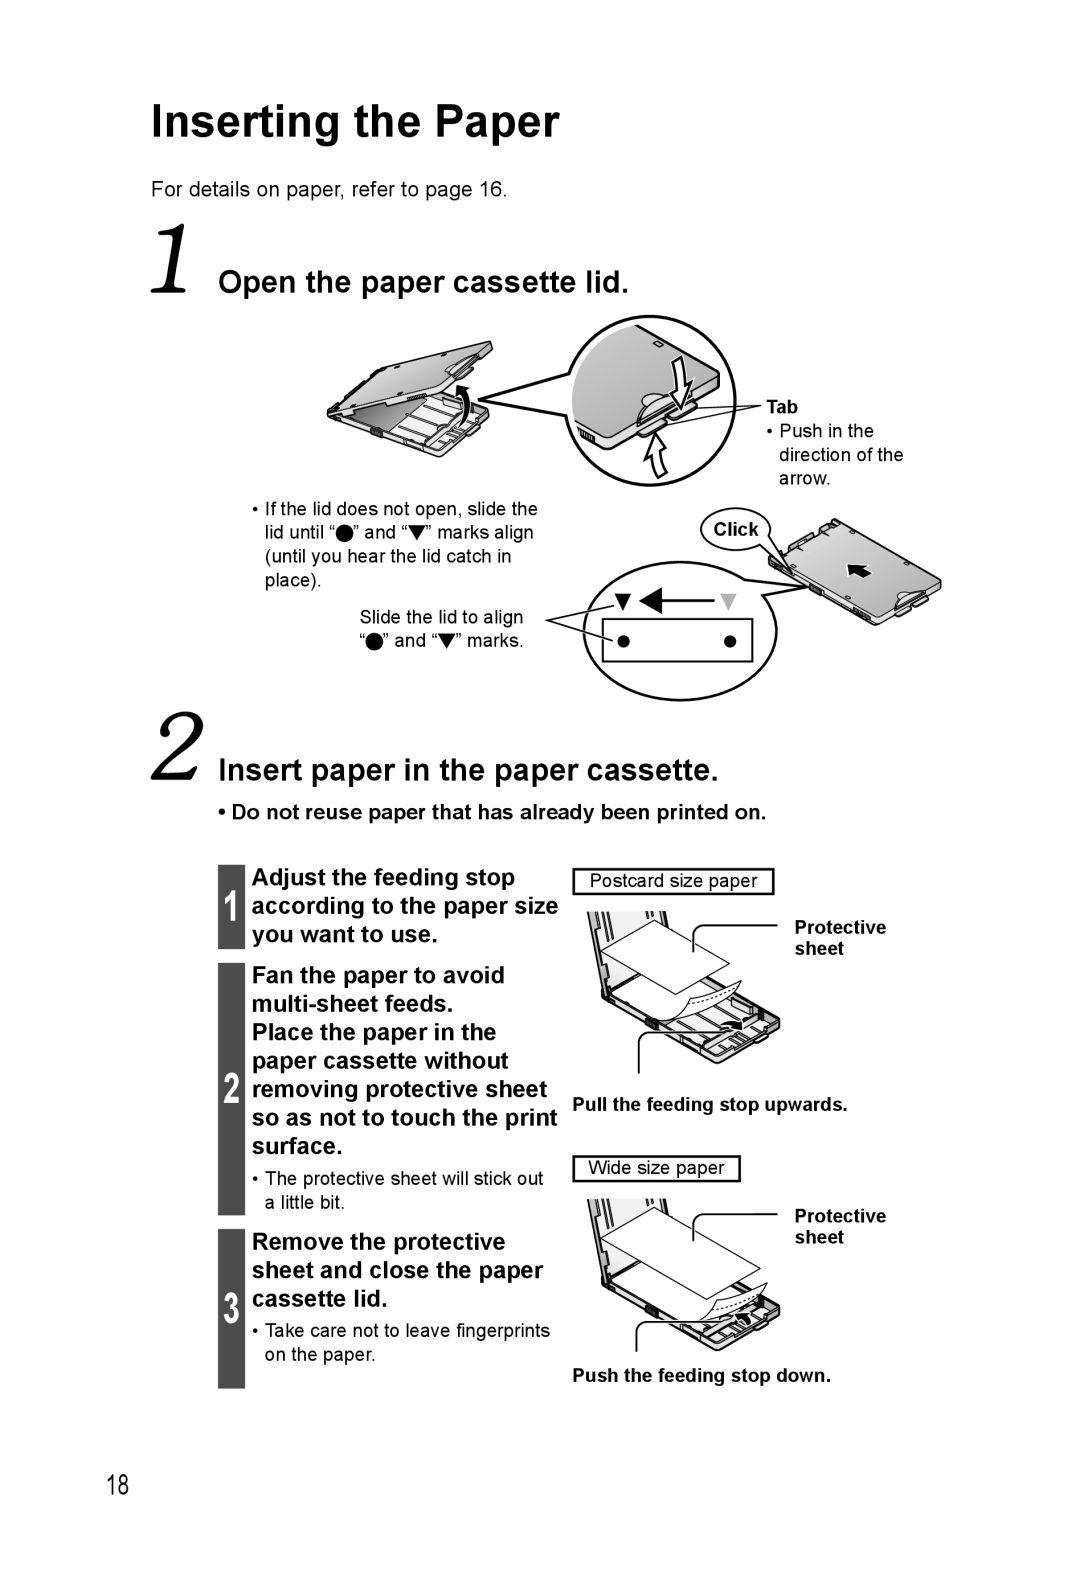 Panasonic KX-PX20M Inserting the Paper, Open the paper cassette lid, Insert paper in the paper cassette 